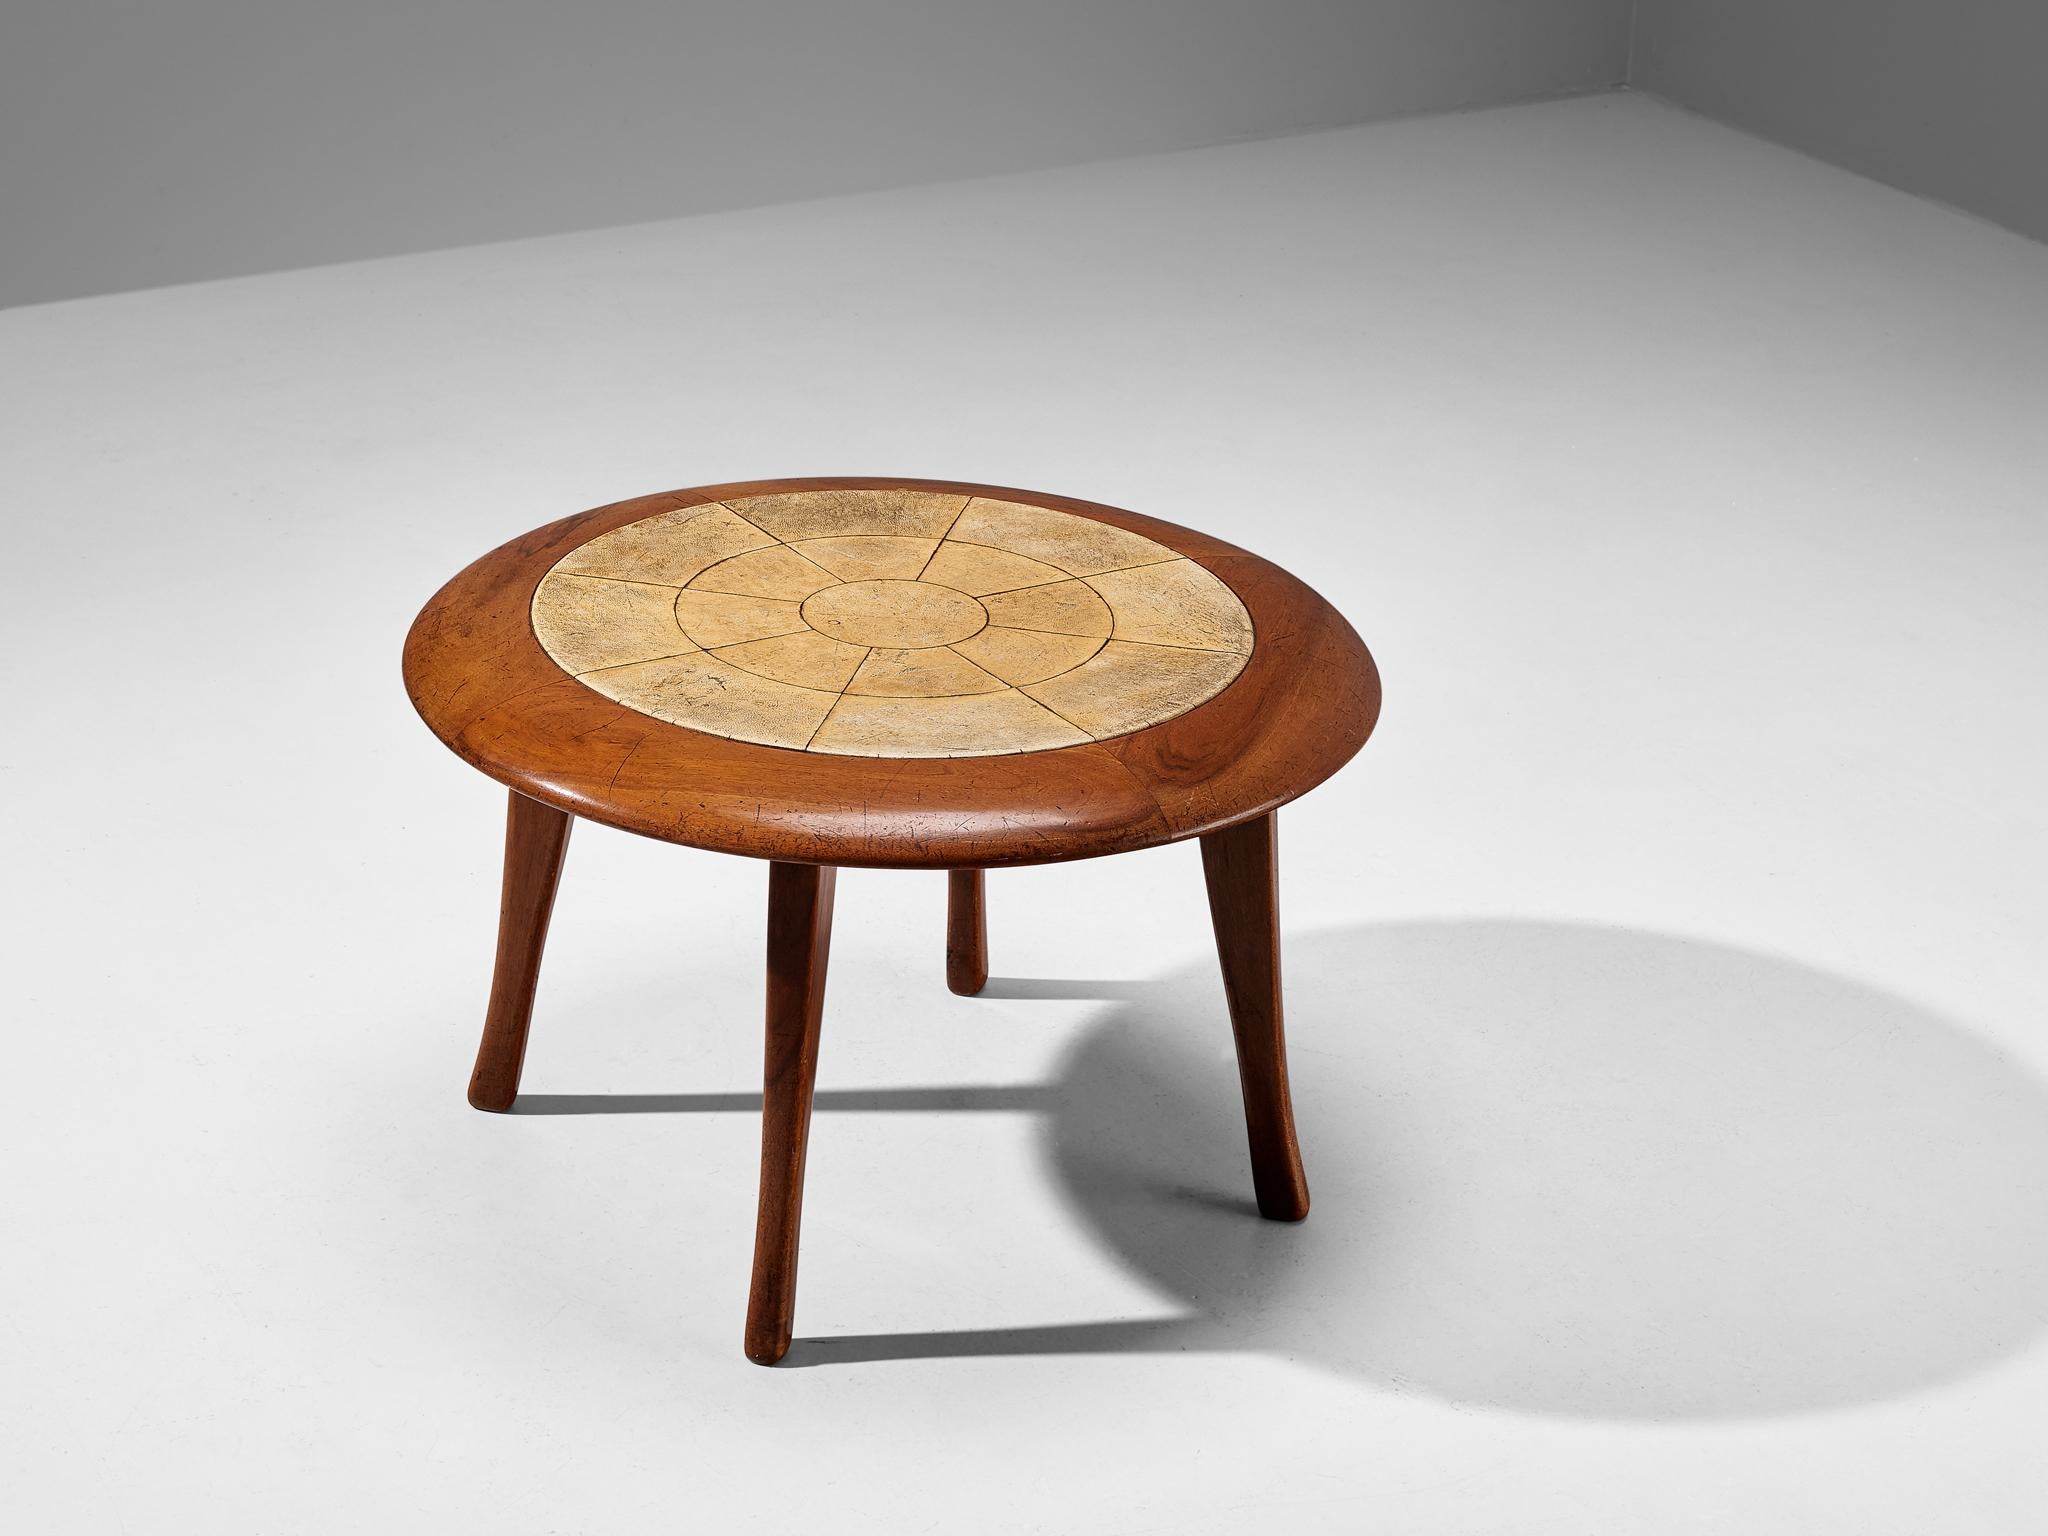 Guglielmo Ulrich, coffee table, sand-colored parchment, walnut, Italy, circa 1940

Stately and elegant coffee table designed by Italian master Guglielmo Ulrich around 1940. This table has a beautiful inlay of parchment on top of the table. The wood